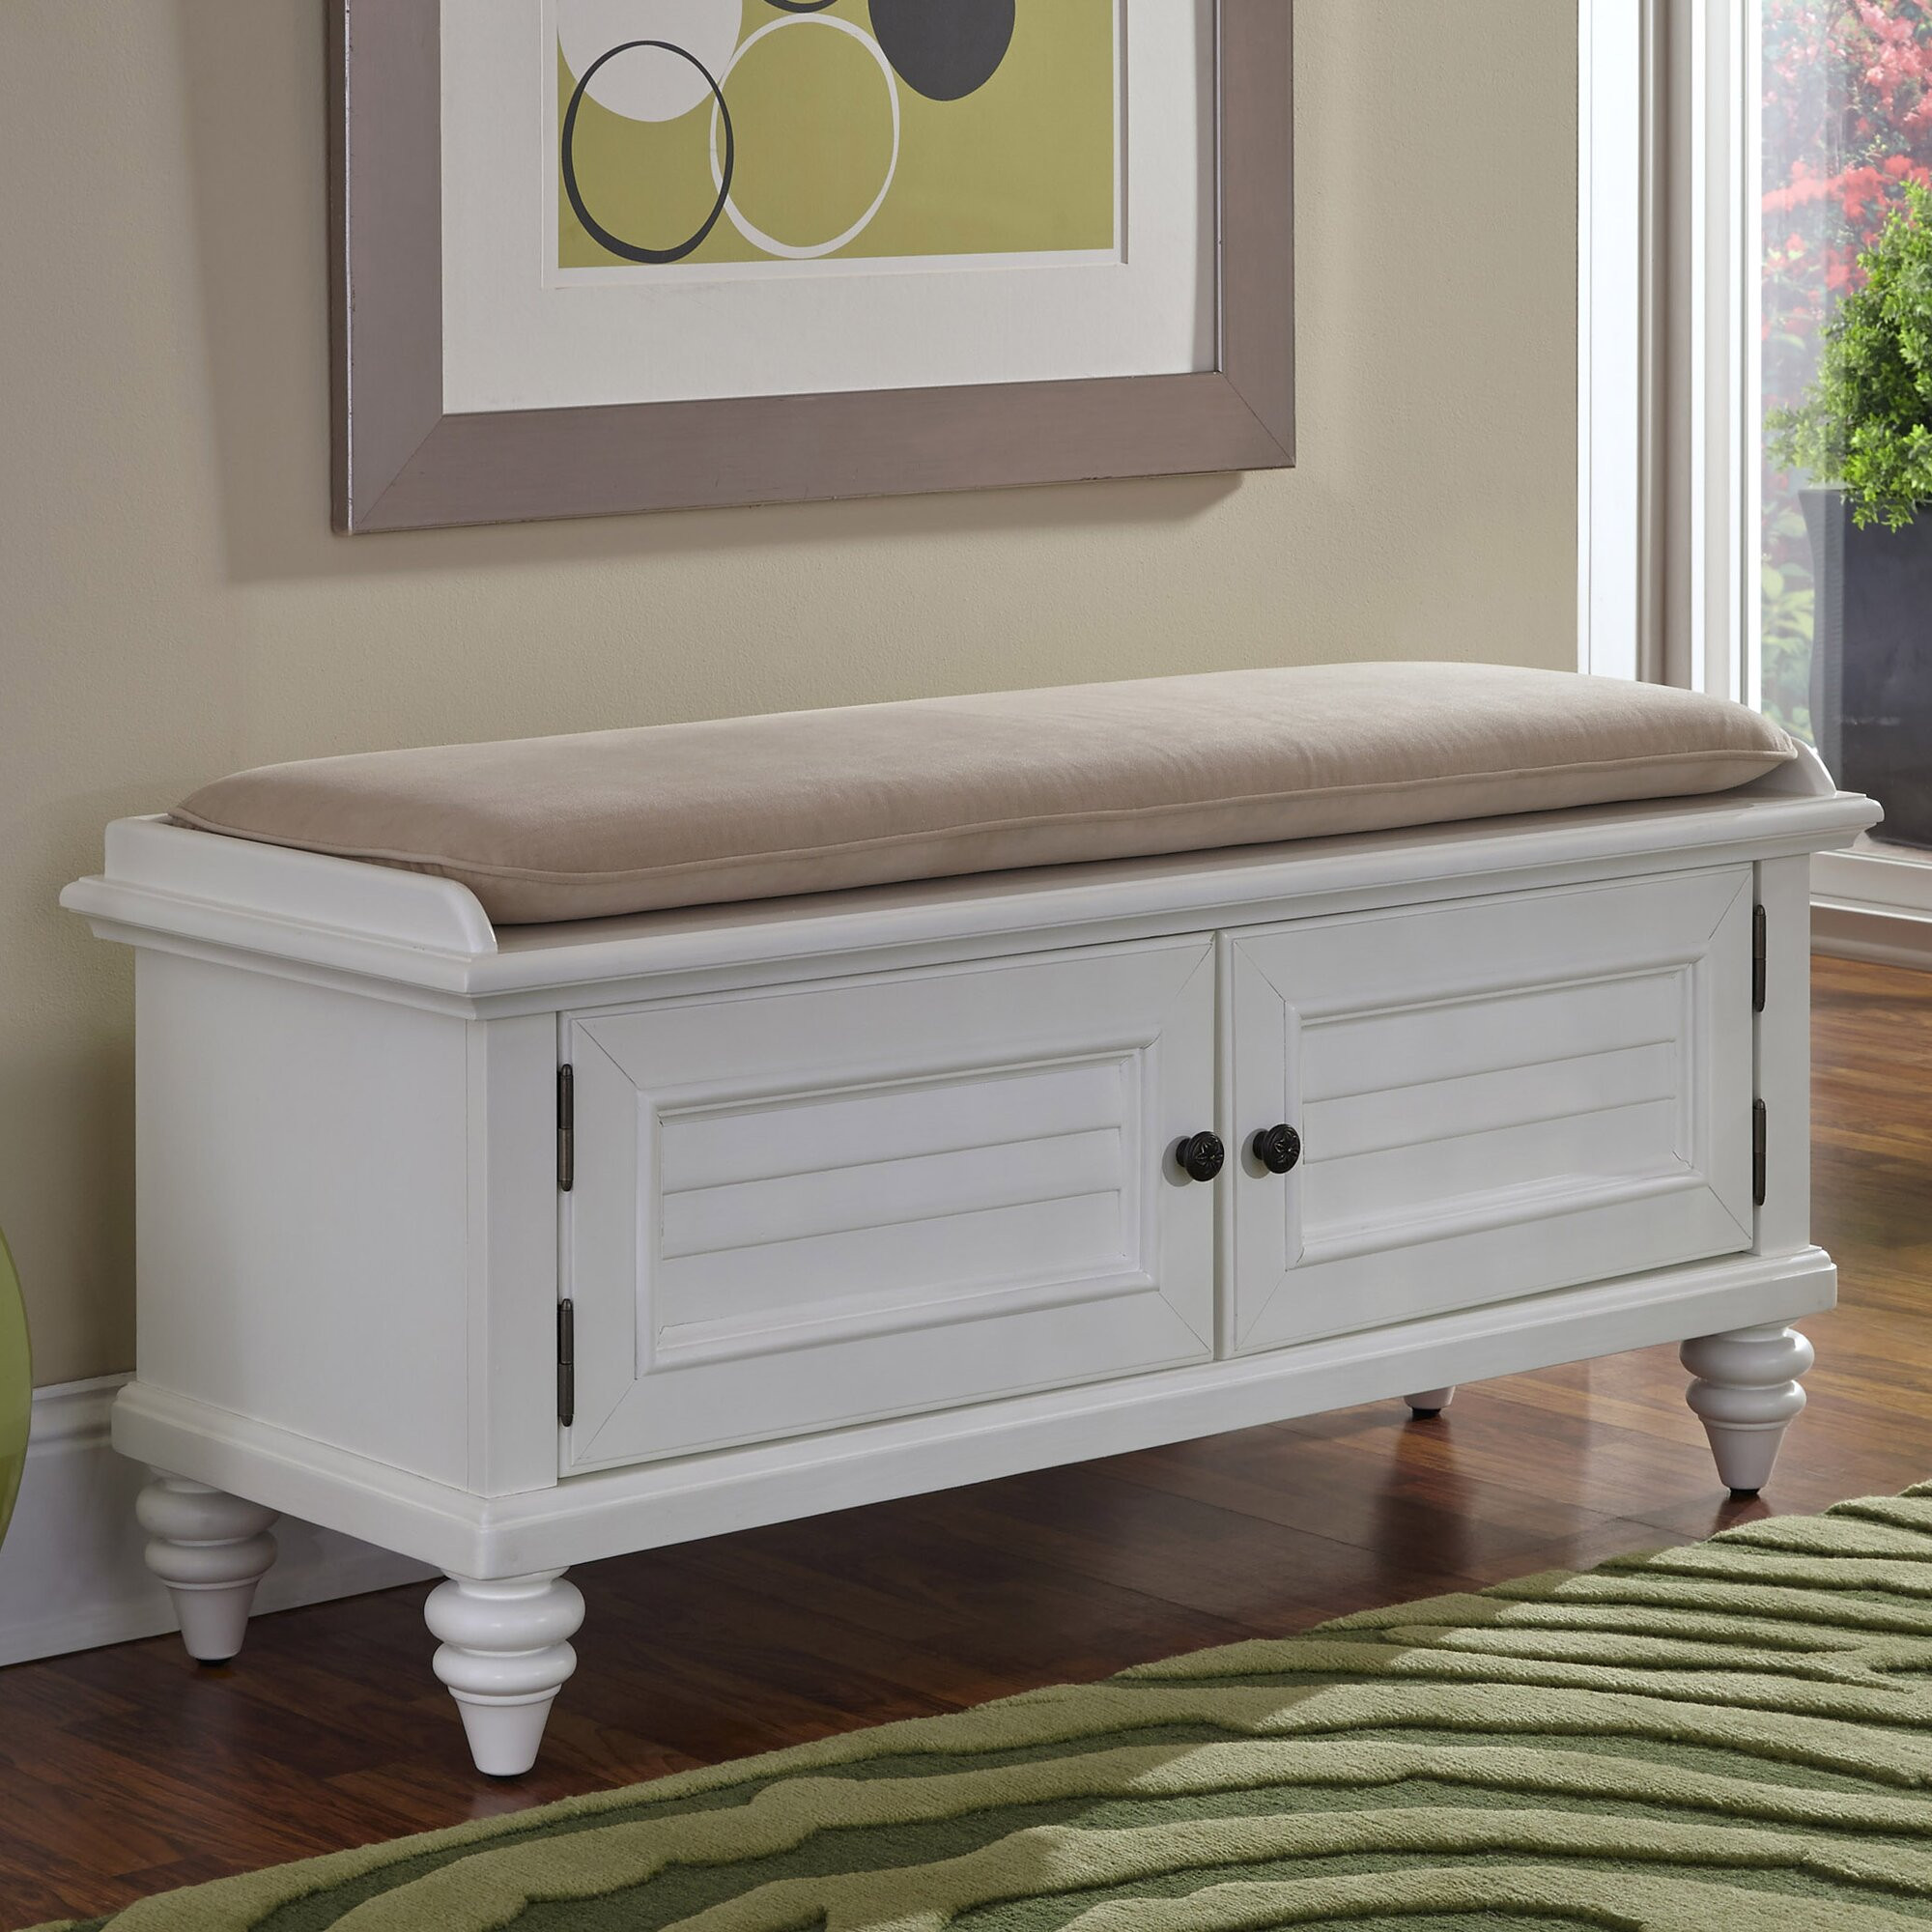 Entry Bench With Storage
 Breakwater Bay Kenduskeag Upholstered Storage Entryway